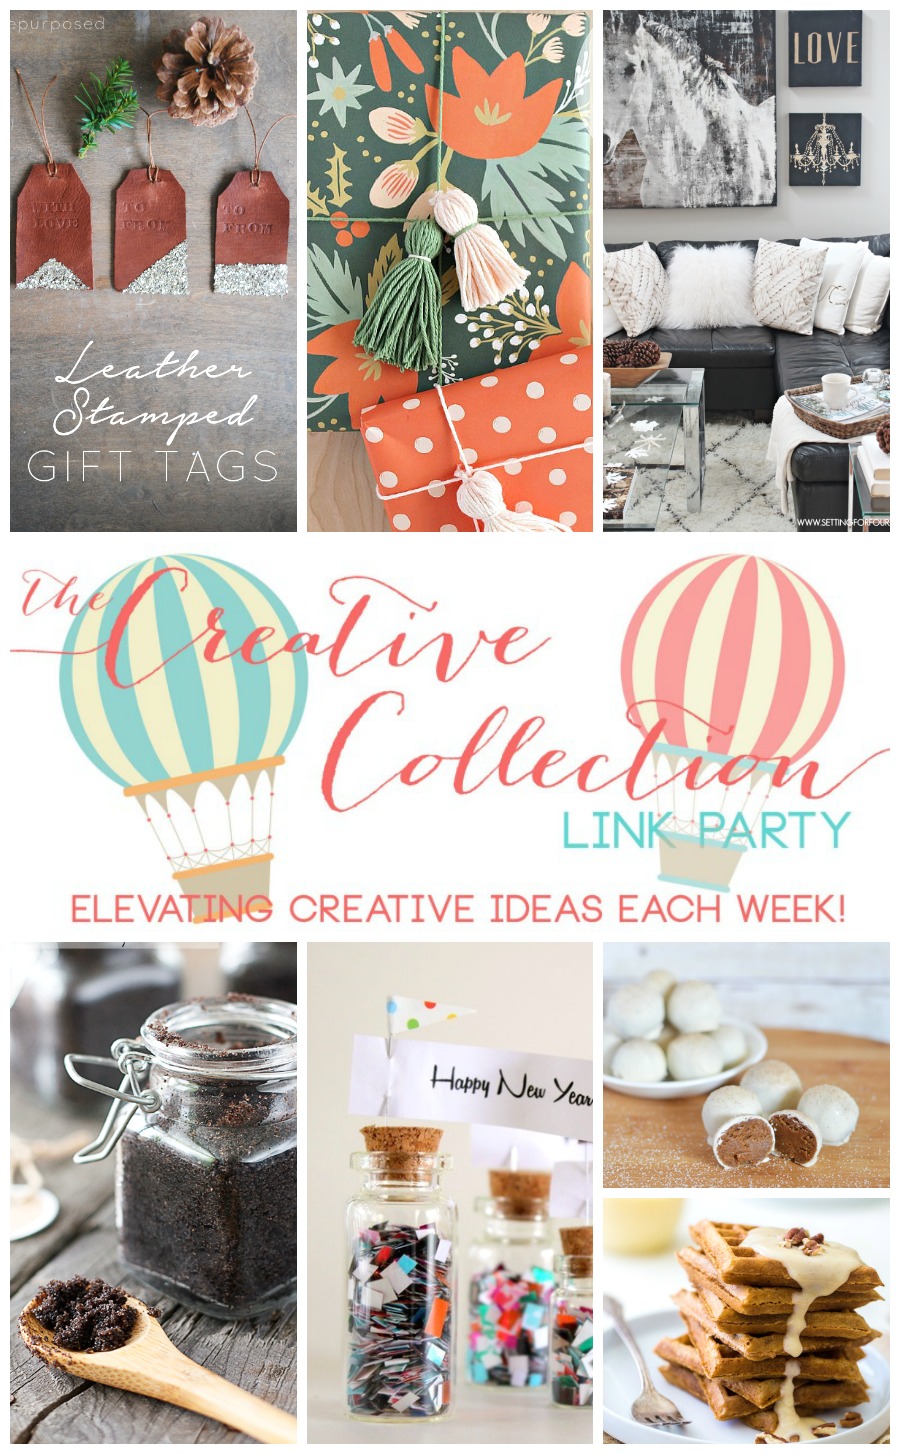 The Creative Collection Link Party